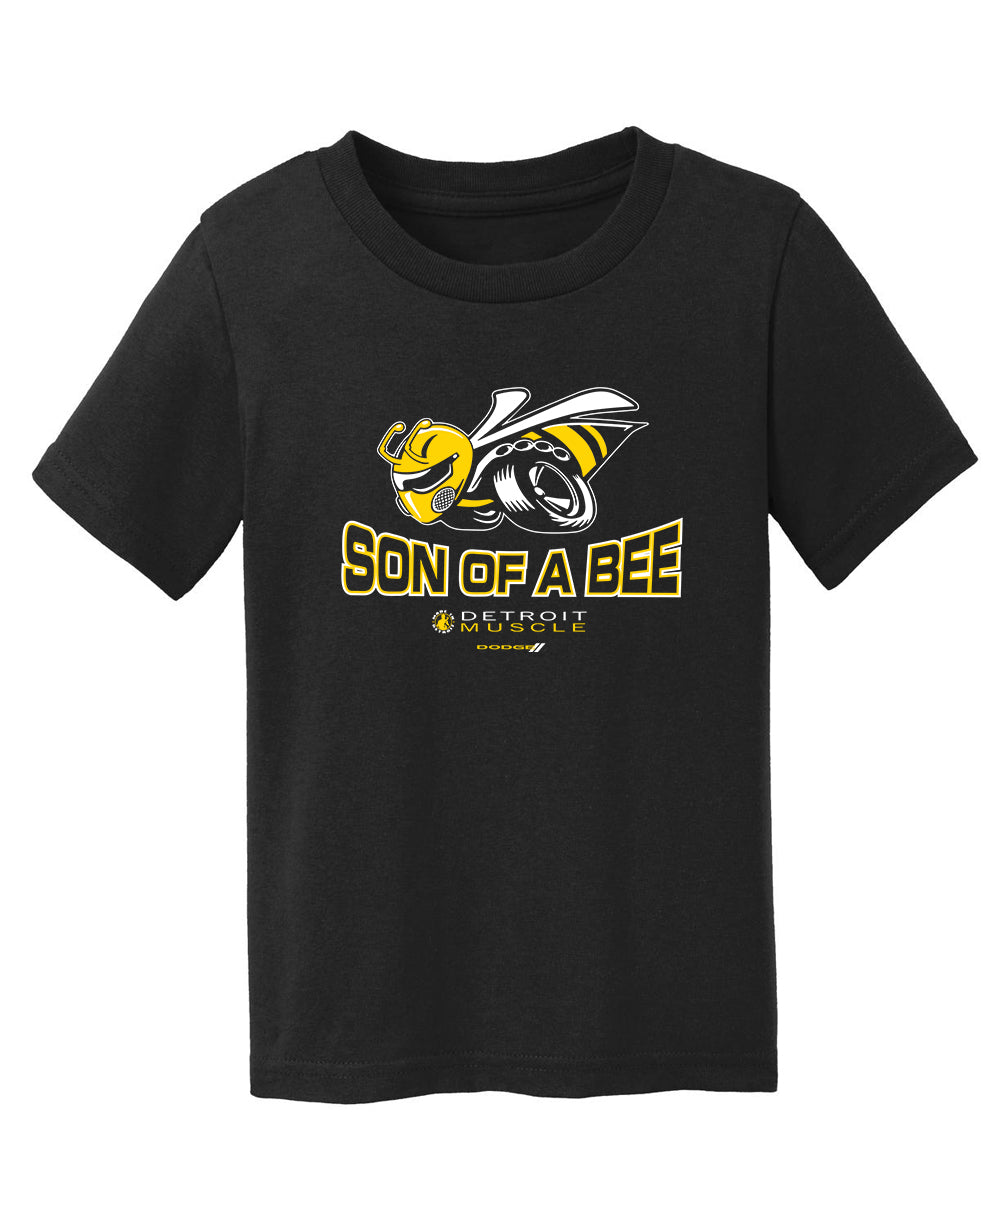 Dodge Son of a Bee - Youth Tee